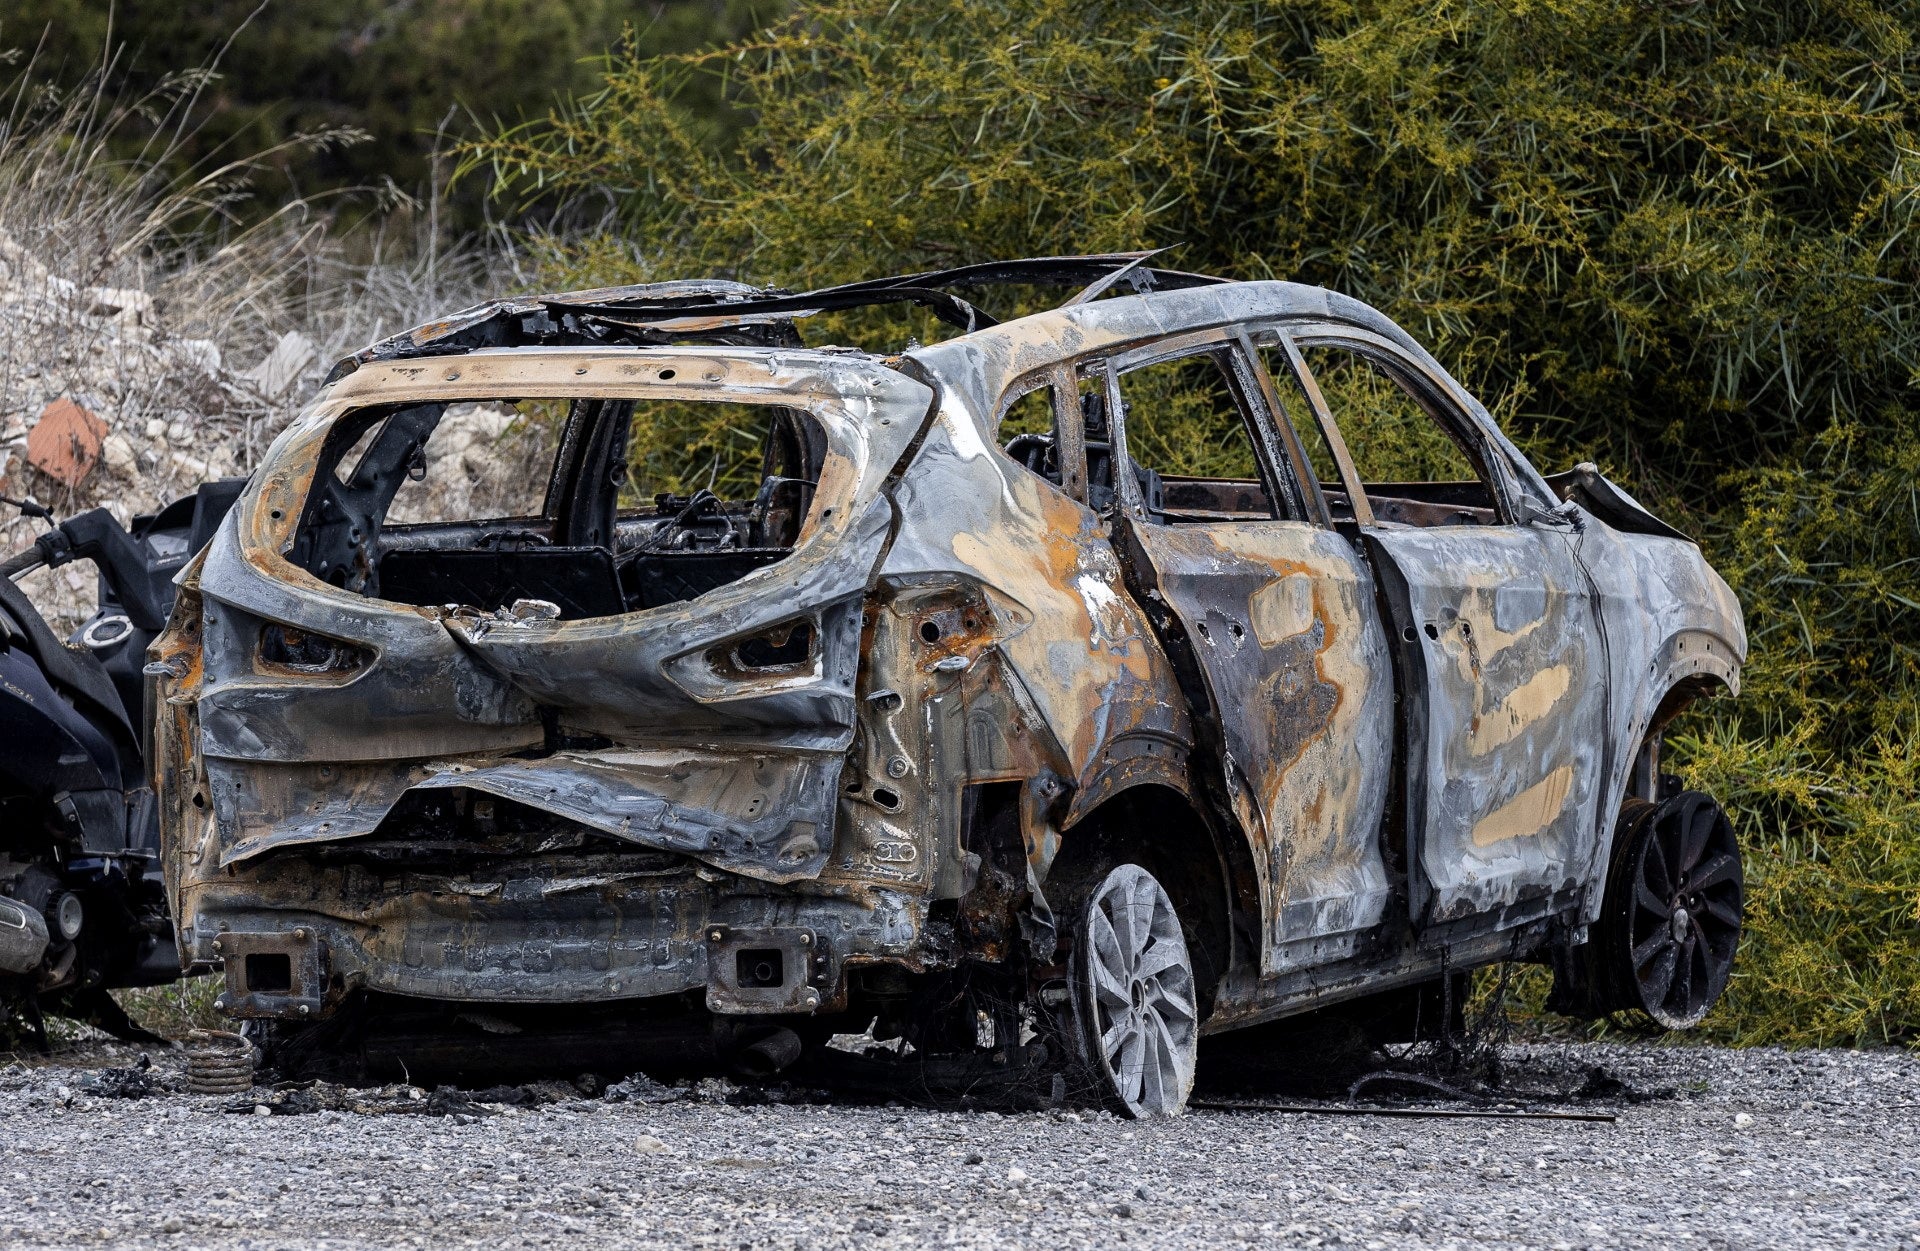 A burned car allegedly used by the killers to escape the scene is parked outside the Guardia Civil barracks, in El Campello